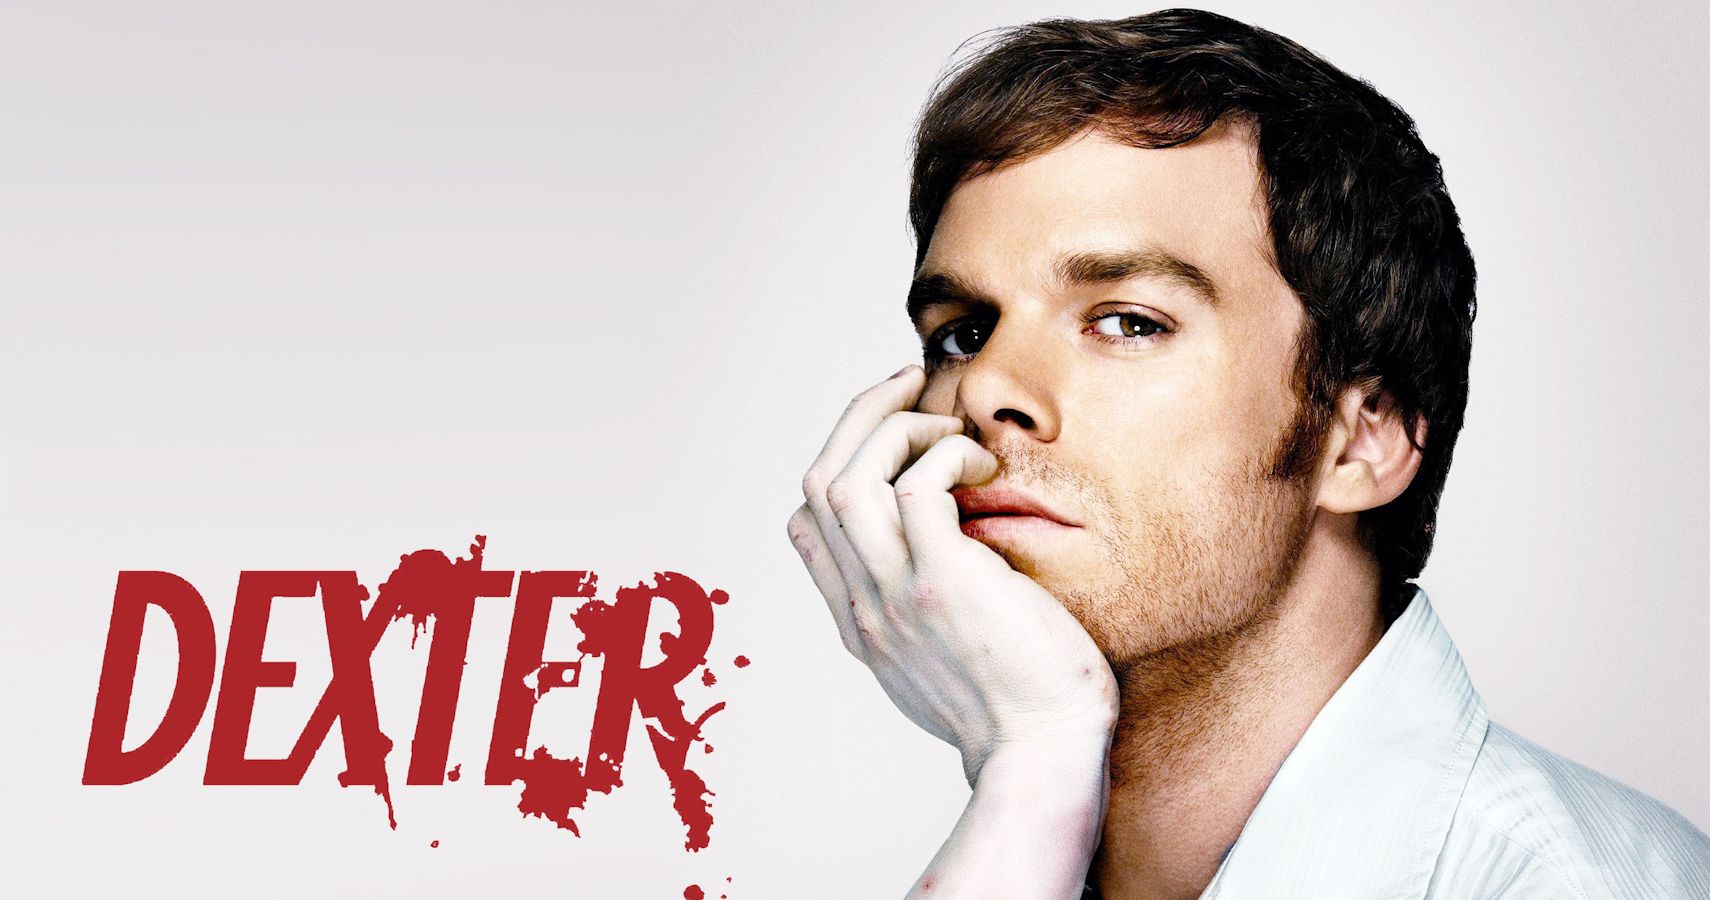 Dexter Every Episode In Season 1 Ranked According To Imdb